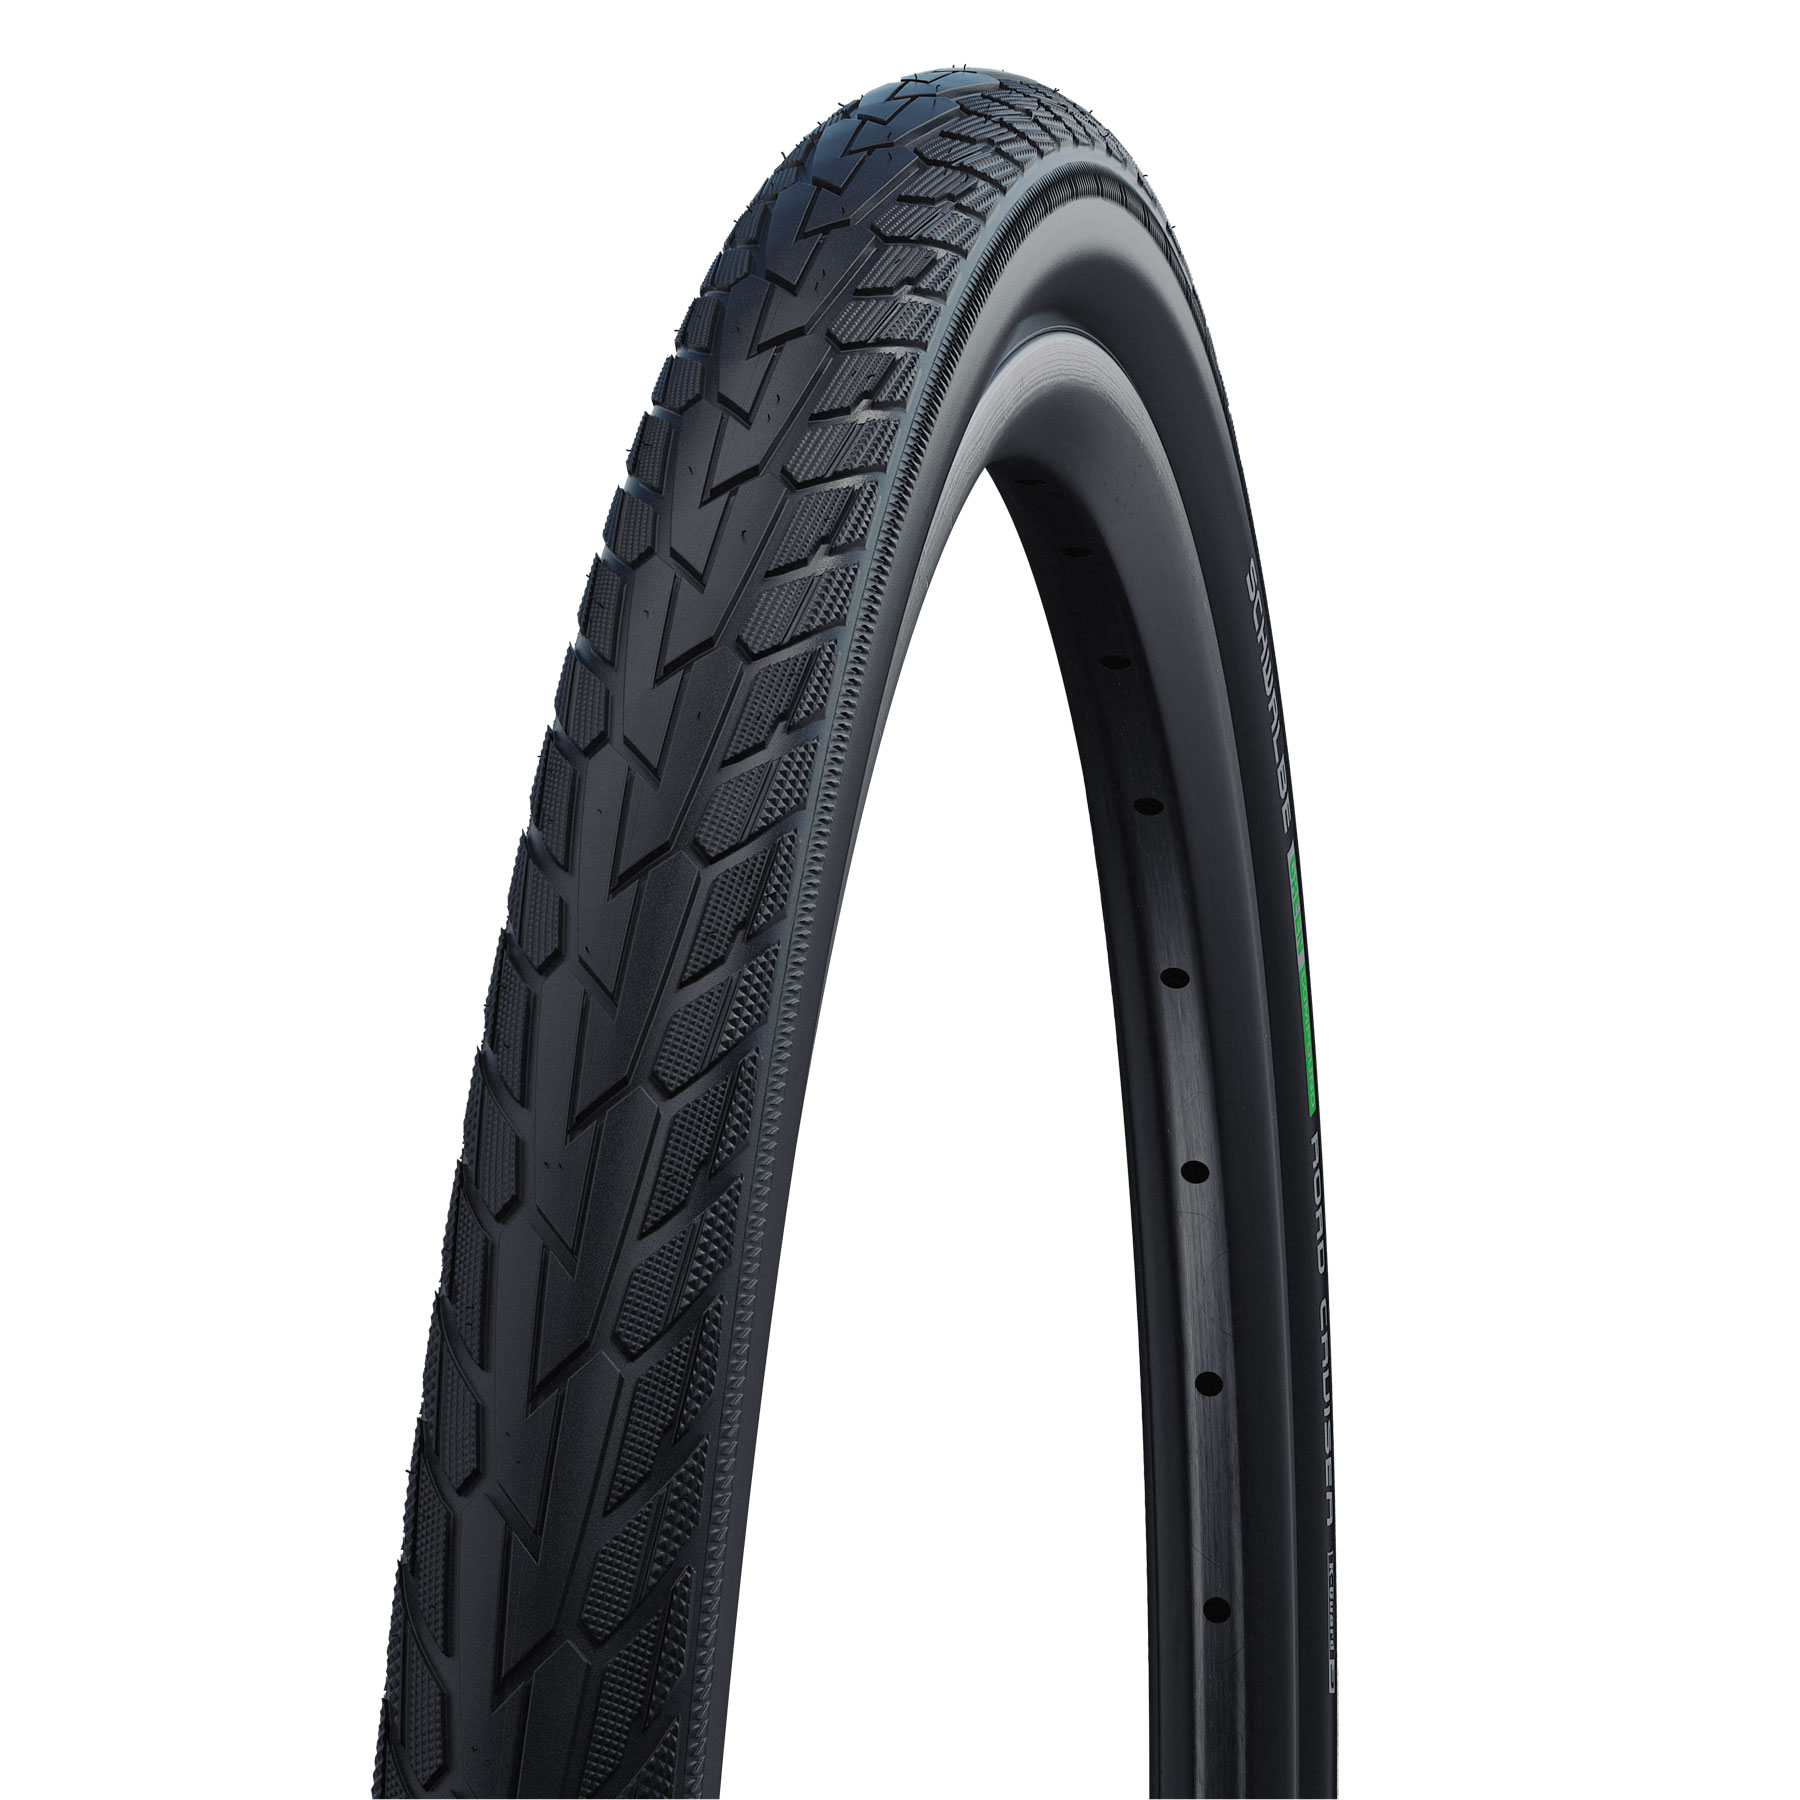 Productfoto van Schwalbe Road Cruiser Active Wired Tire - 20x1.75 Inches - Black